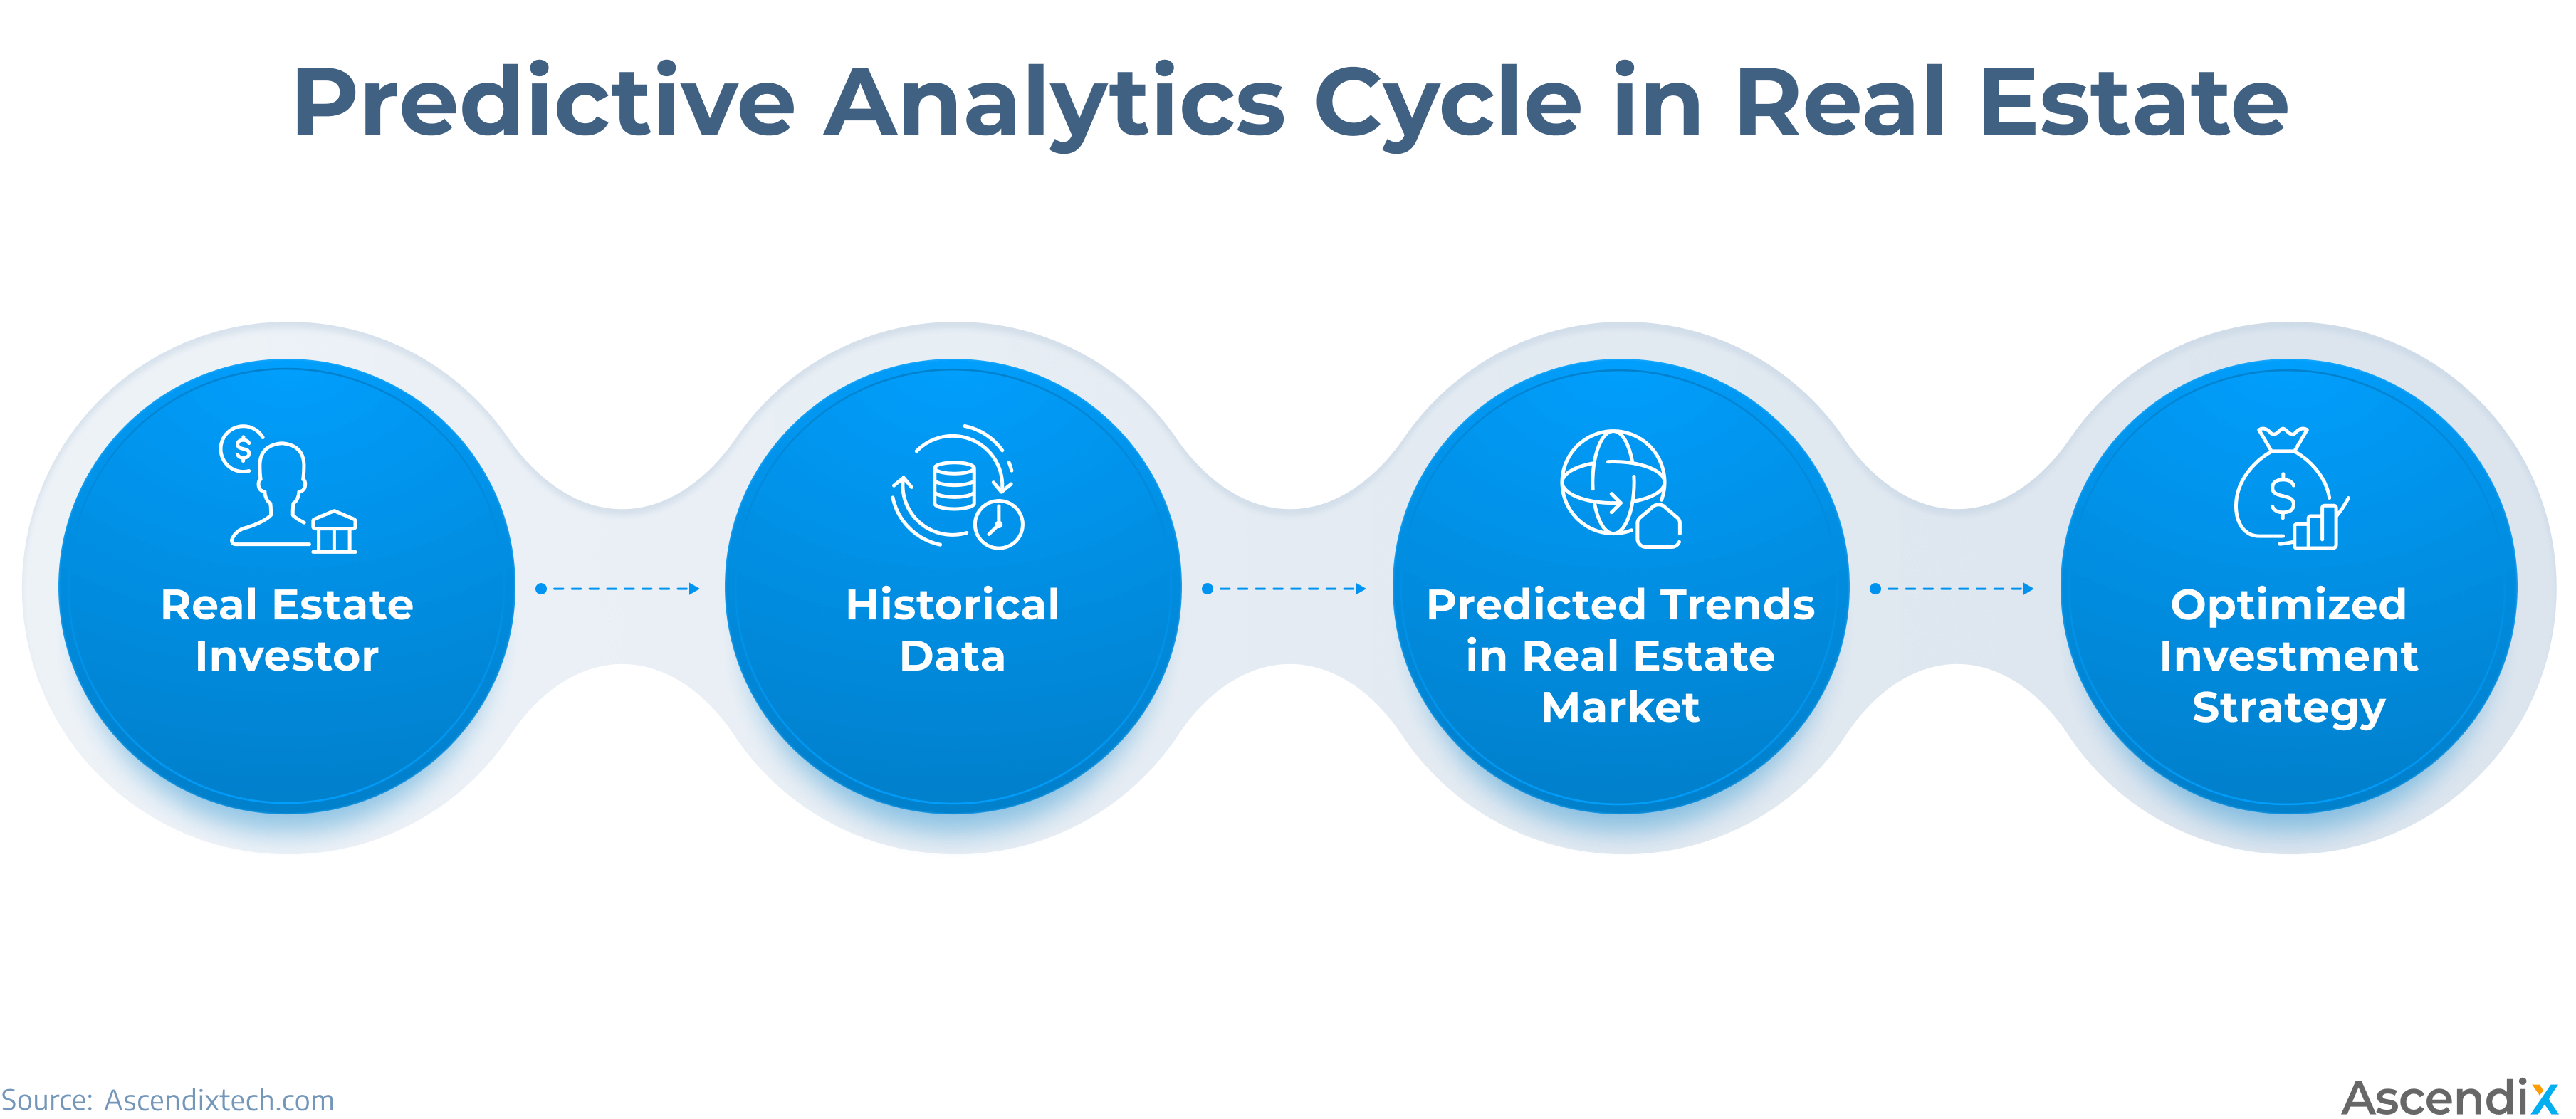 Predictive analytics cycle in real estate